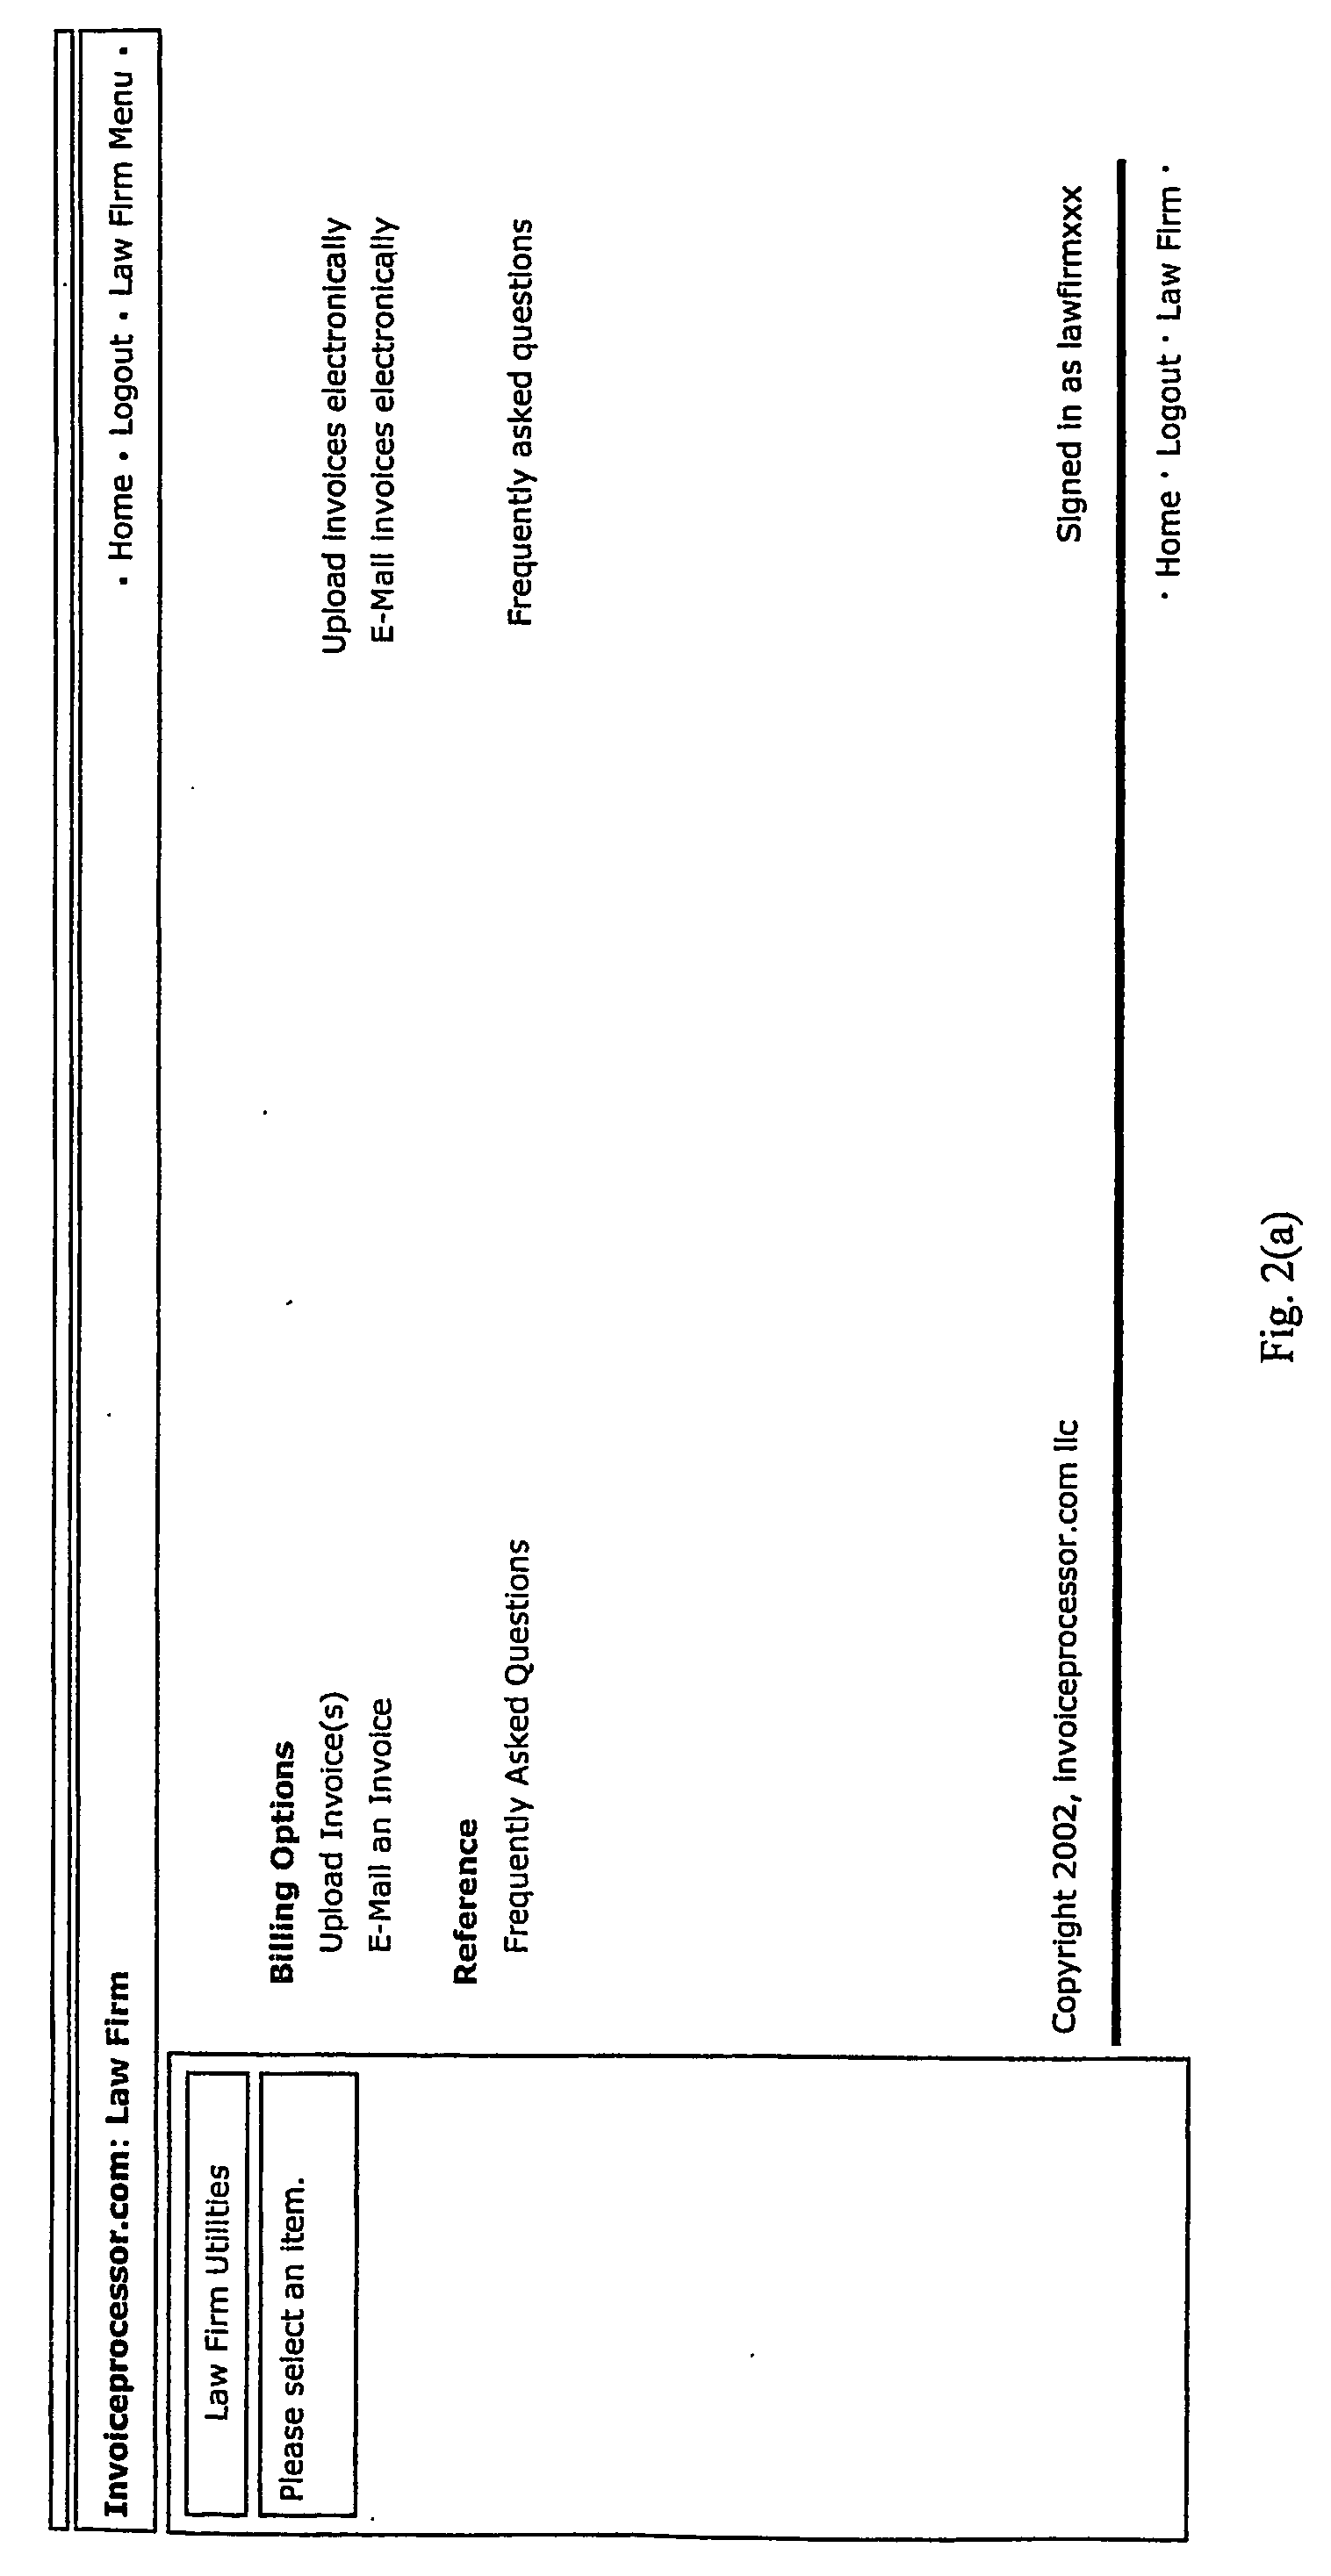 System and method for processing professional service invoices